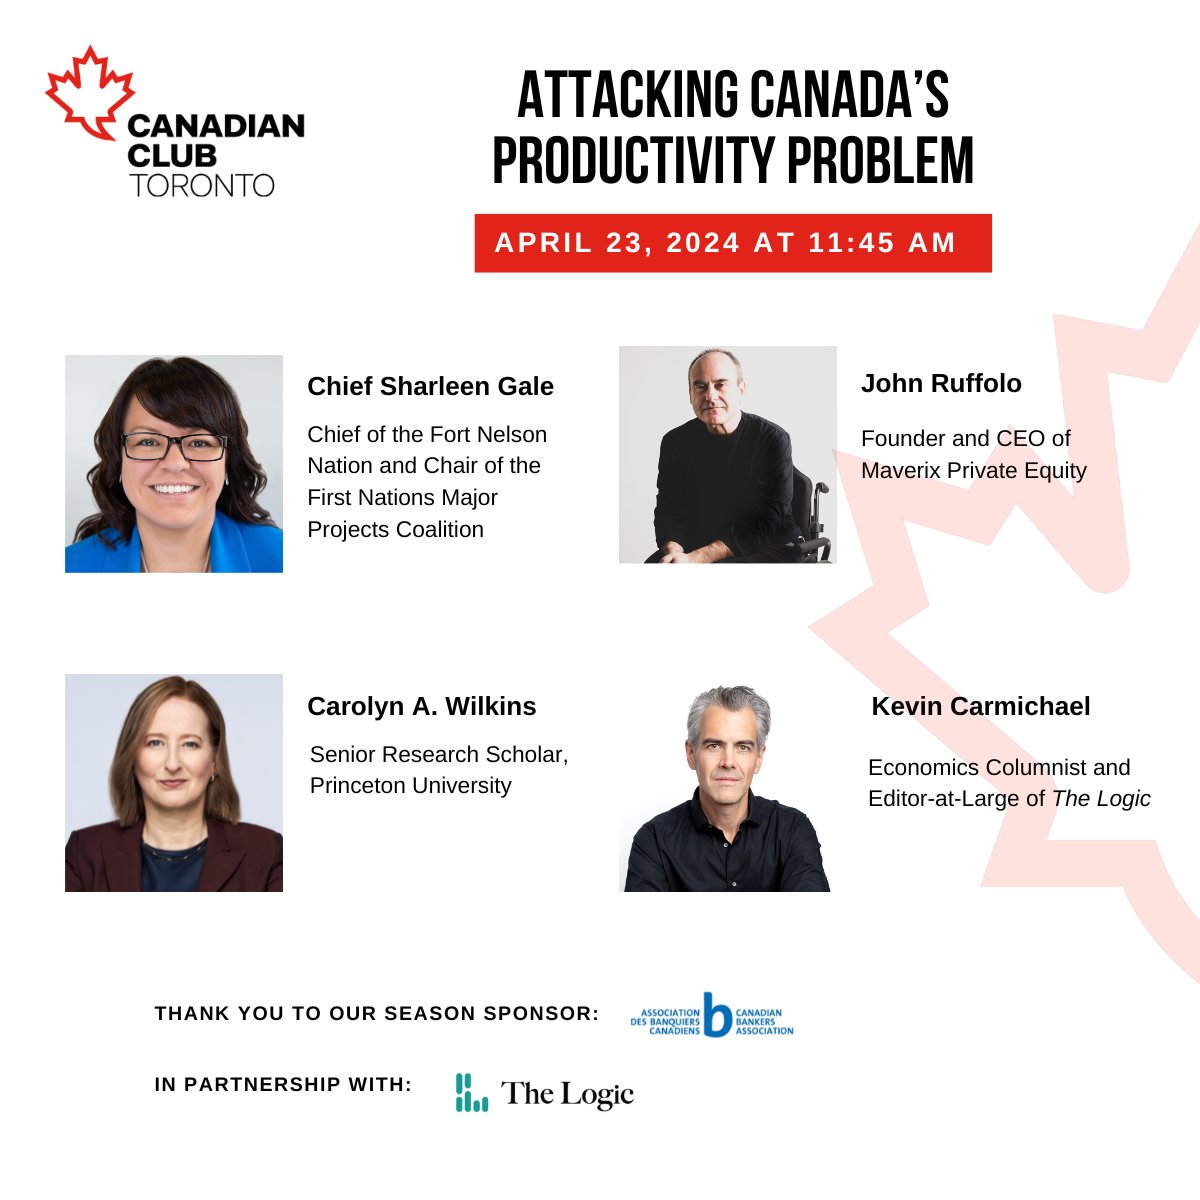 NEW EVENT: Canada's productivity rate has declined almost every quarter for more than two years. Join us on April 23 when our distinguished panel will engage this challenging and imperative topic by focusing on the issues that matter. Purchase: bit.ly/3VyrT5A